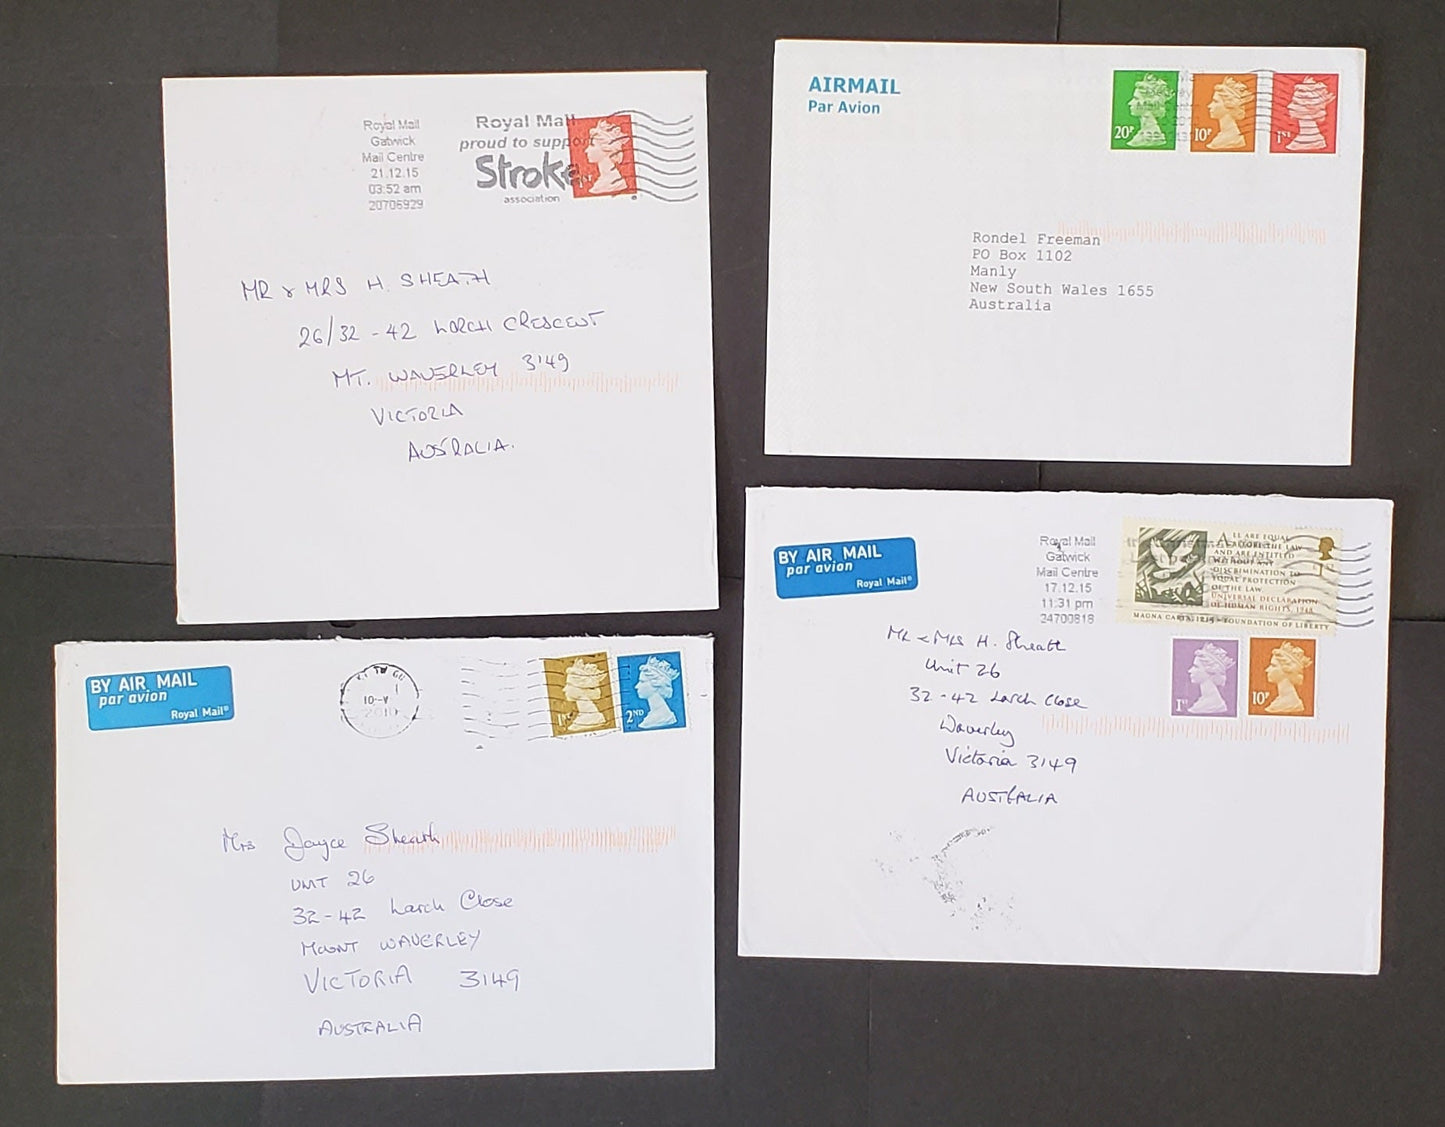 Lot 357 Great Britain 2010-2015 Decimal Machin Covers, A Selection of 4 Different, With Elliptical Perf Security Machins, Values Between 10p and 1st, All Sent to Australia, Net. Est. $10